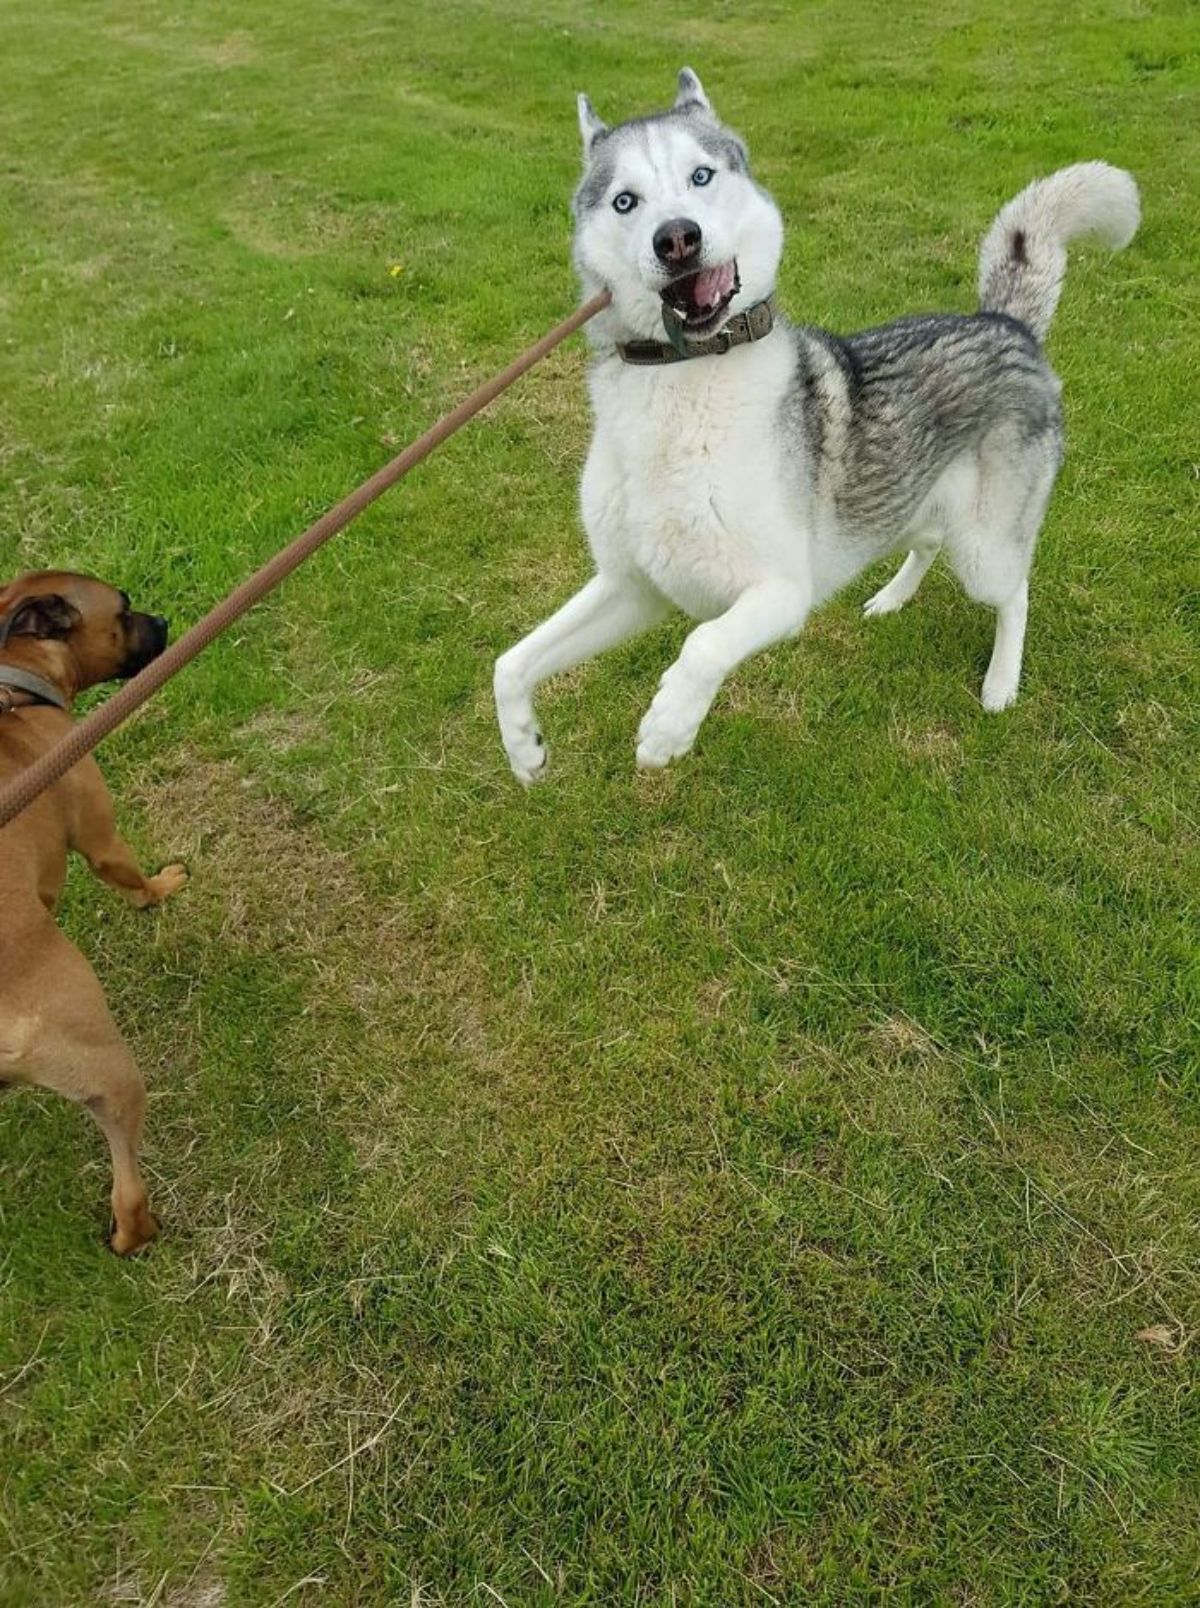 grey and white husky jumping on grass with a long stick on the side of its face with a brown dog next to it on the grass